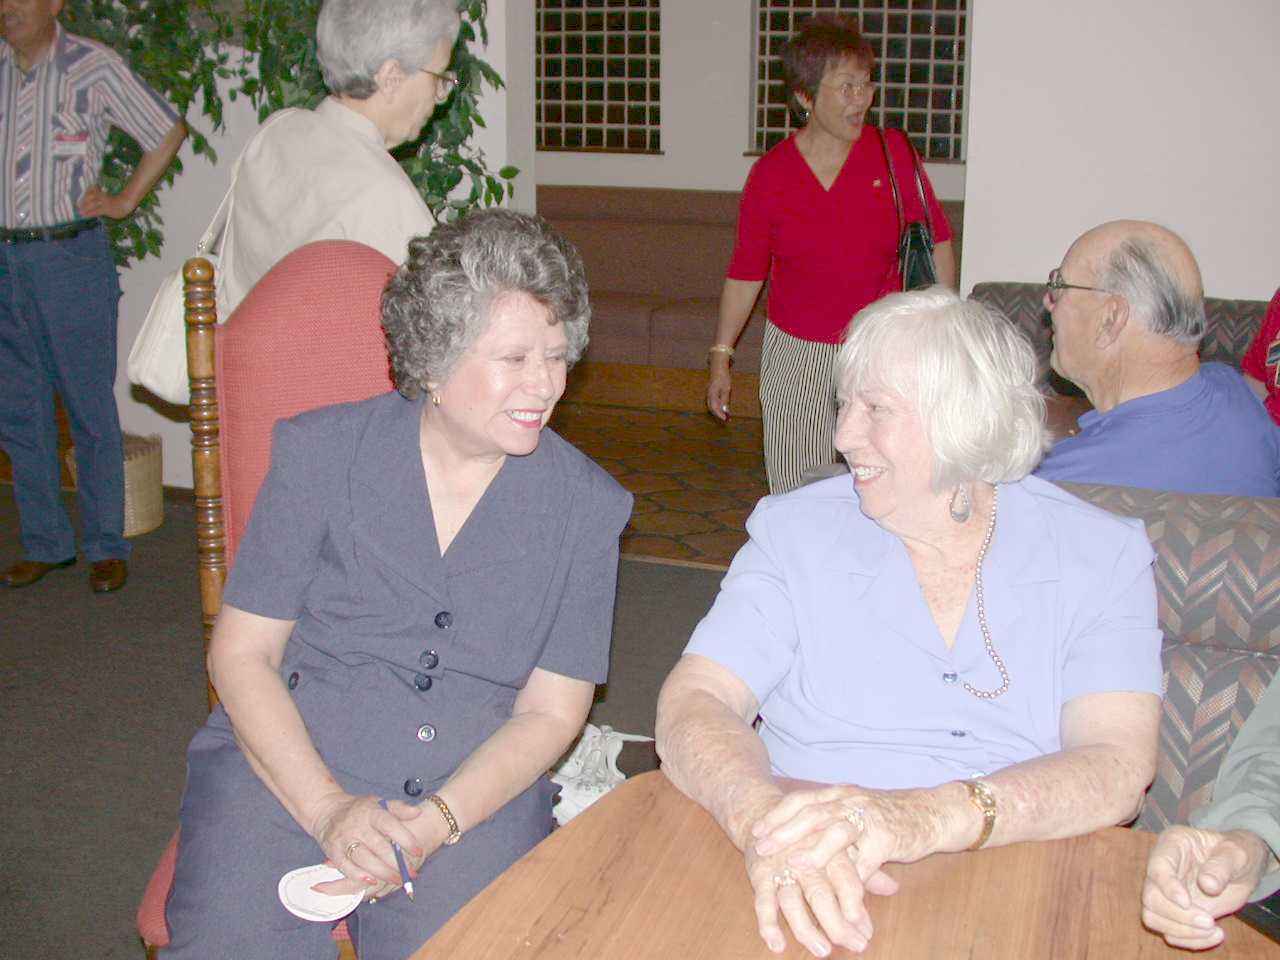 Martha G. Brown Gardner with "sister" Mary Green June 14, 2003